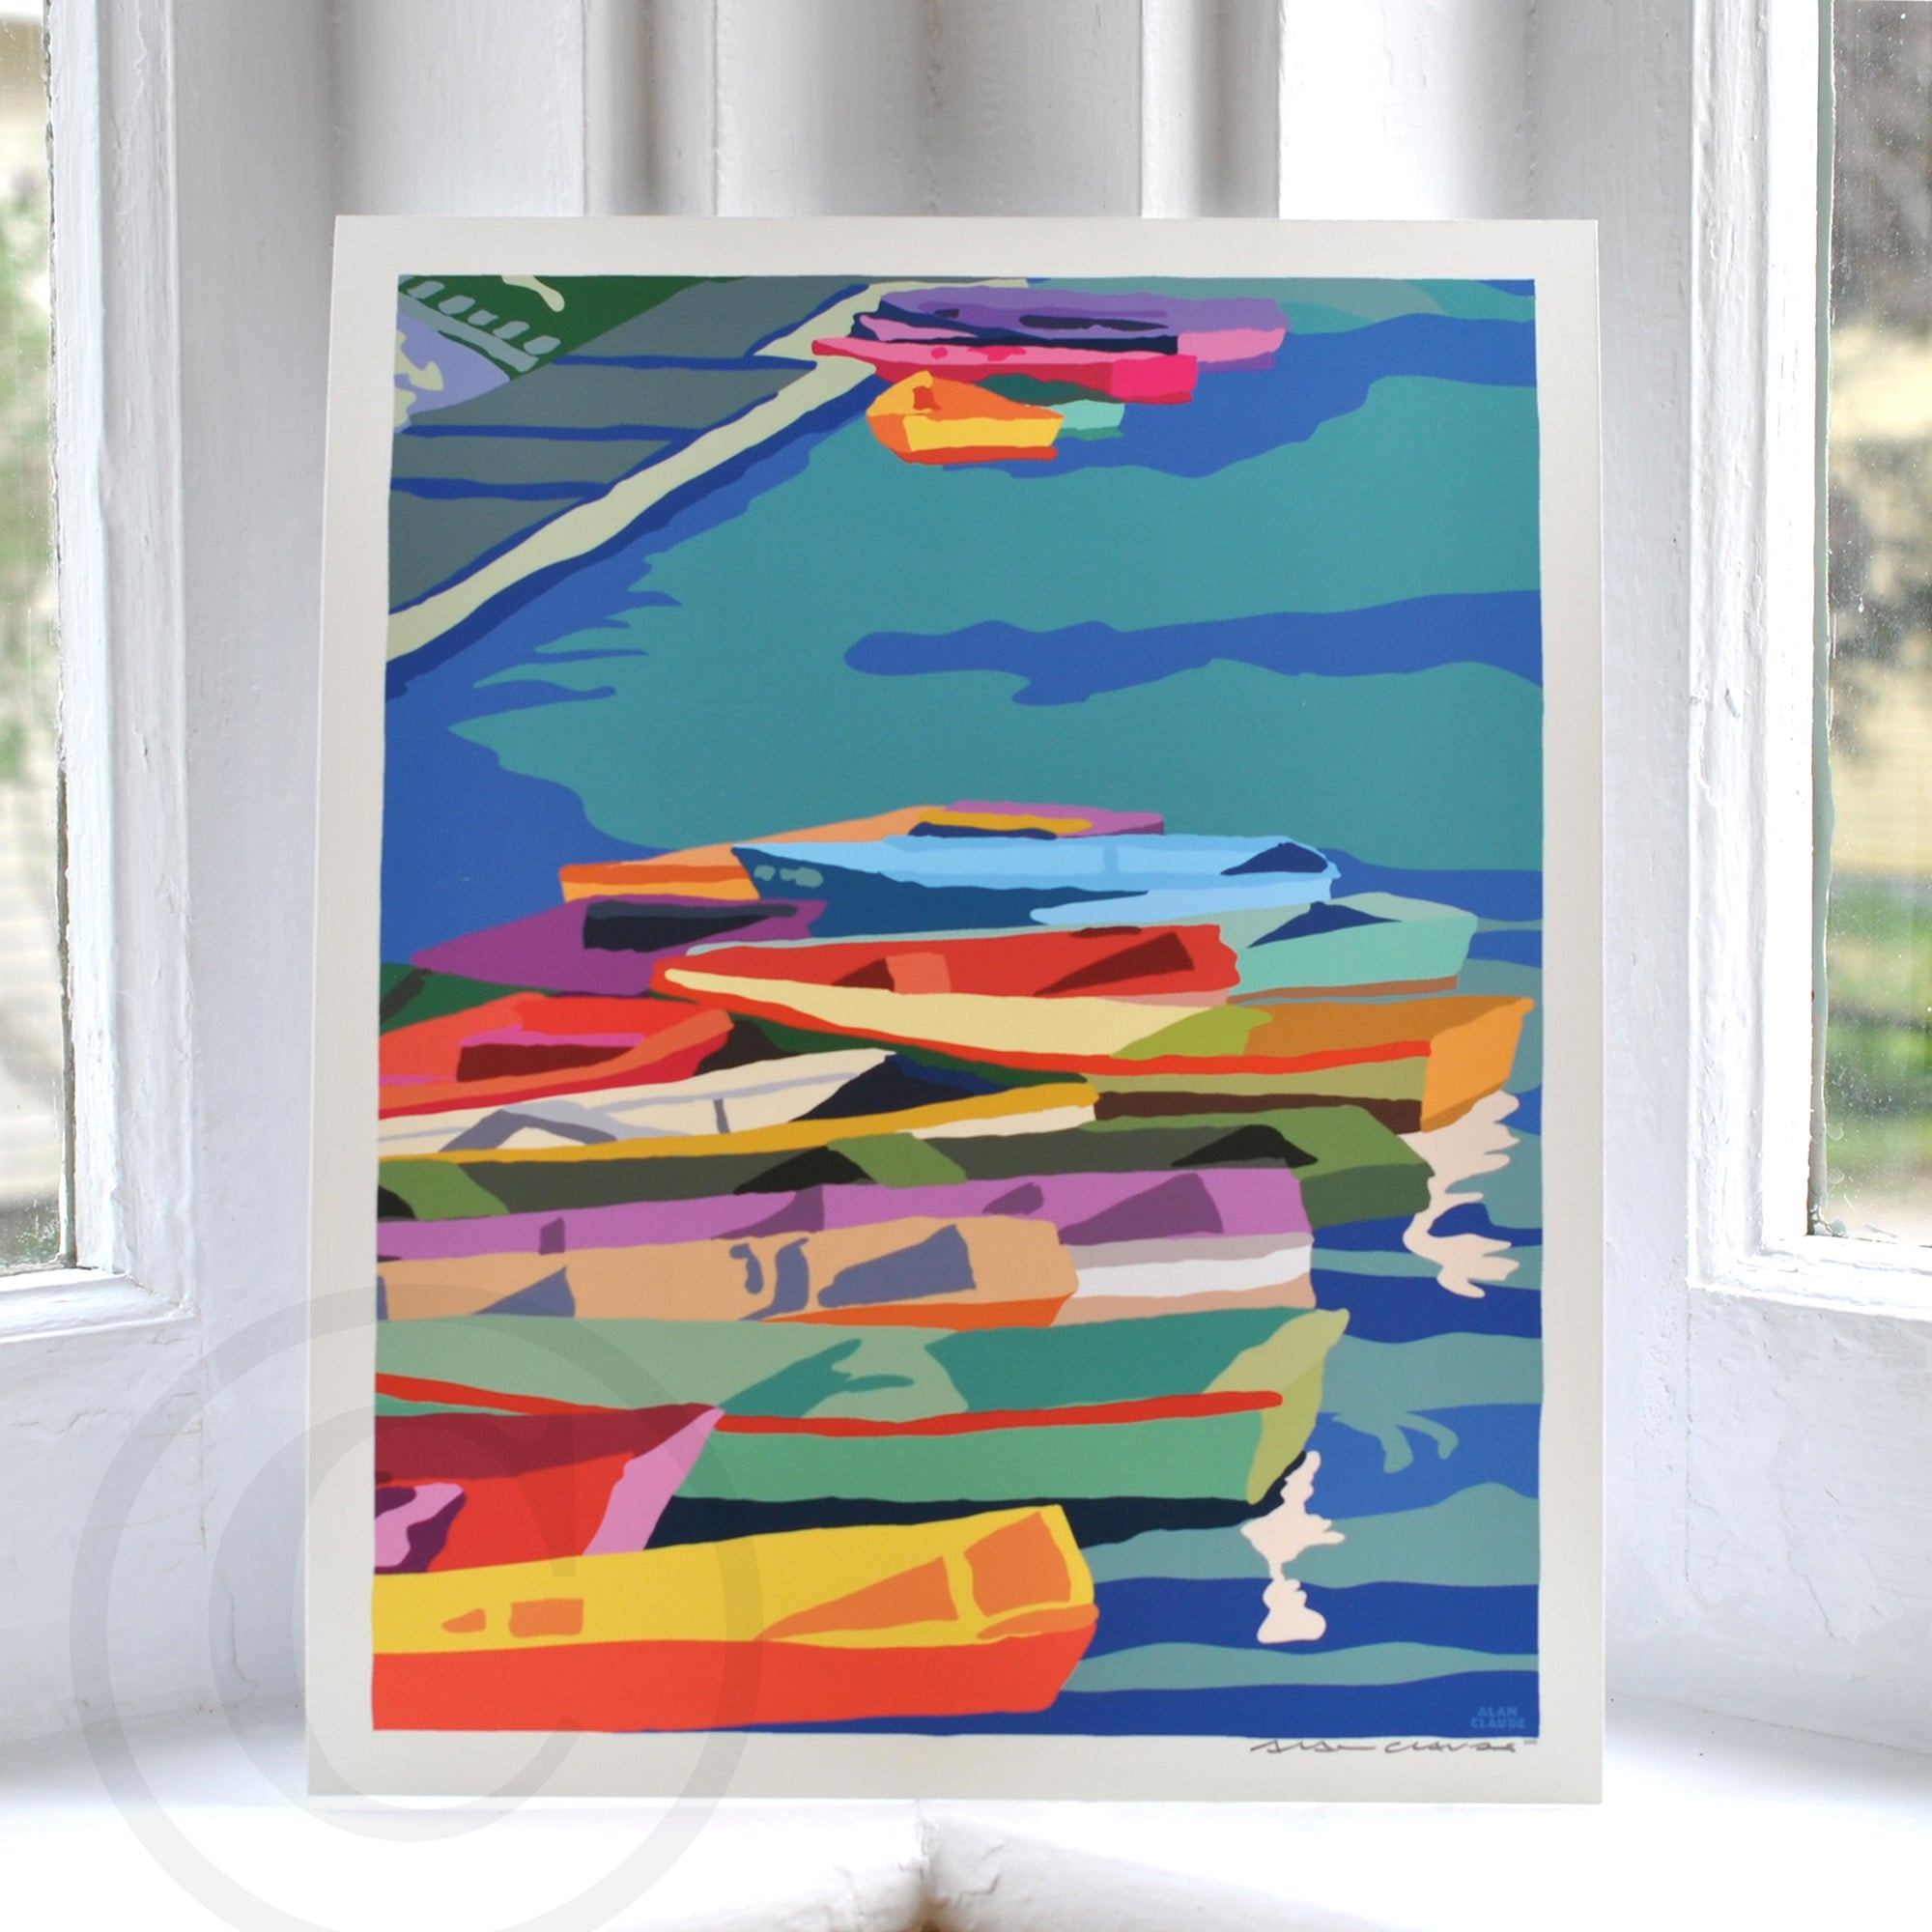 Perkins Cove Dinghies Art Print 8" x 10" Vertical Travel Poster By Alan Claude - Maine